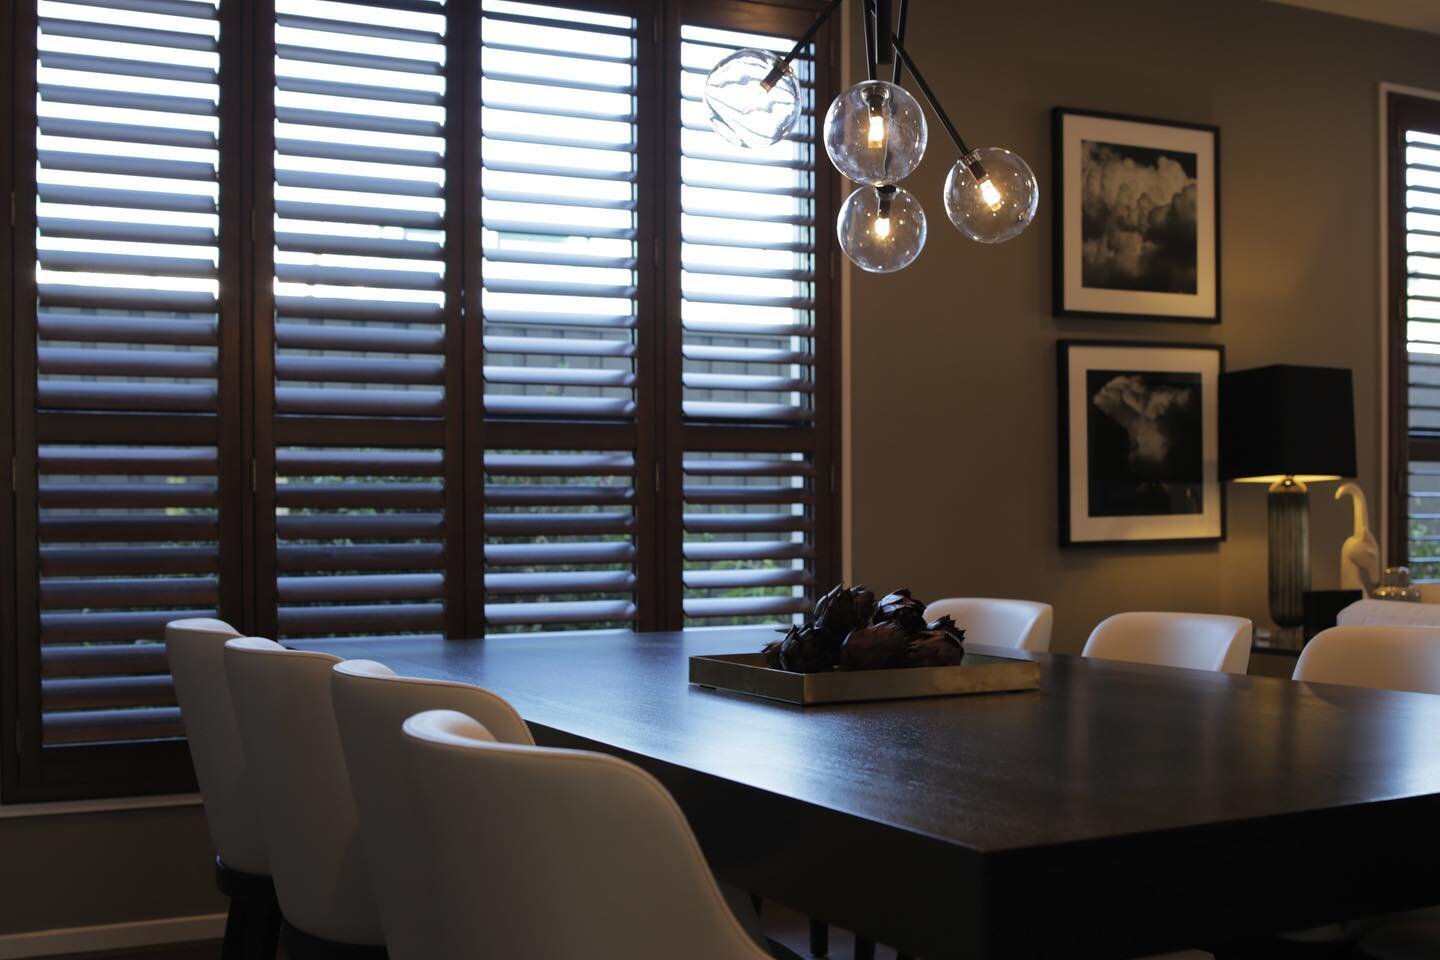 Our beautiful Inception Timber Shutters pair perfectly with this dining room aesthetic.
With our range of stylish painted and stained finishes, you&rsquo;ll find the perfect shade to suit your project.

#interiordesign #brisbaneinteriors #brisbanehom